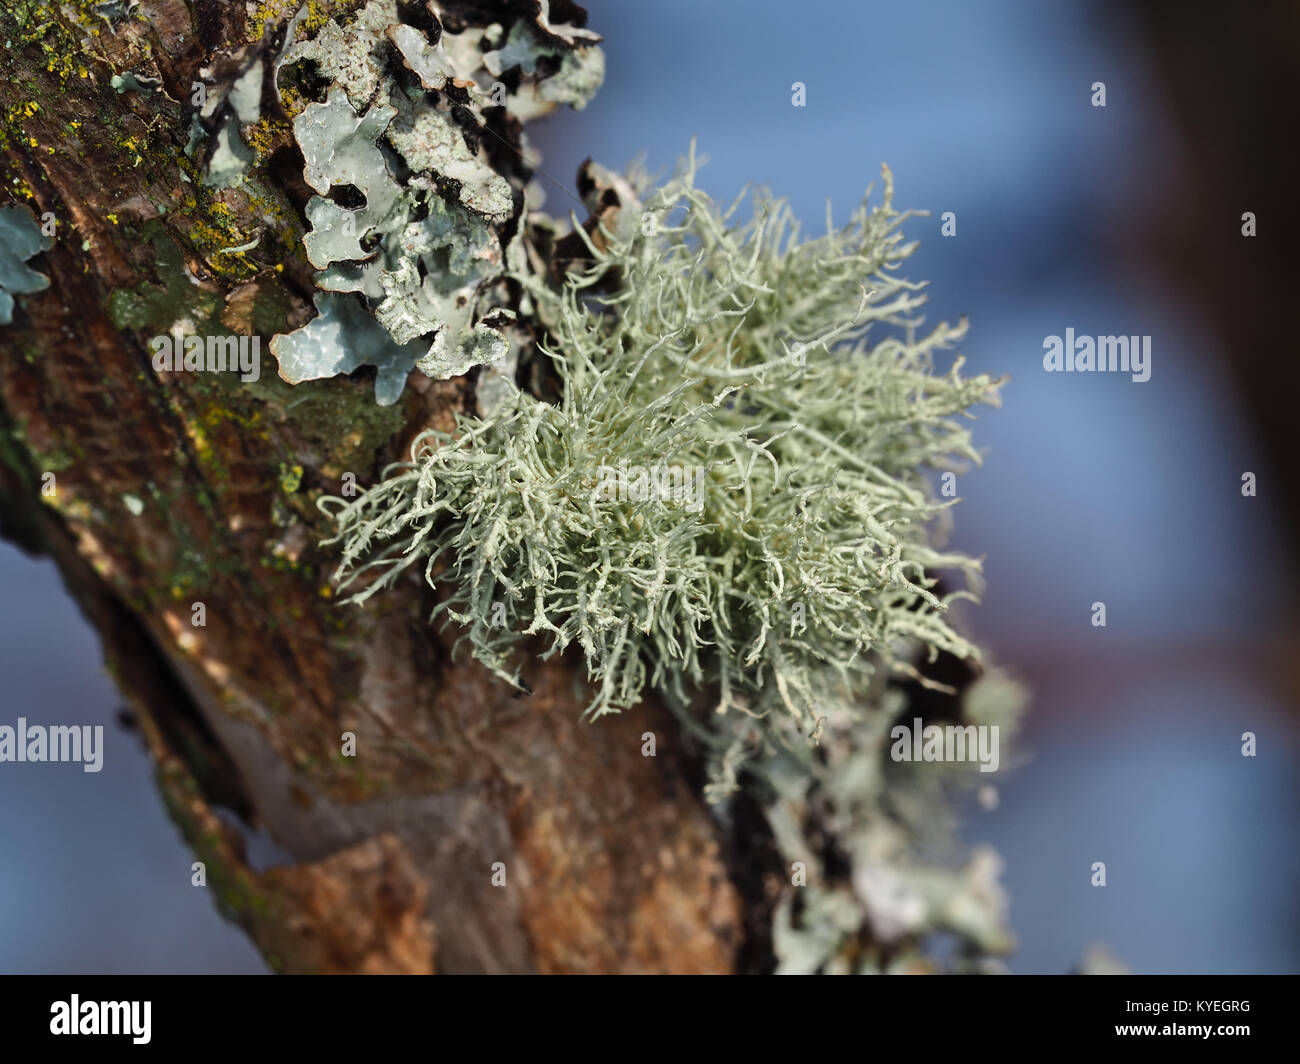 Macro shot of fruticose and foliose lichens growing on a tree branch Stock Photo